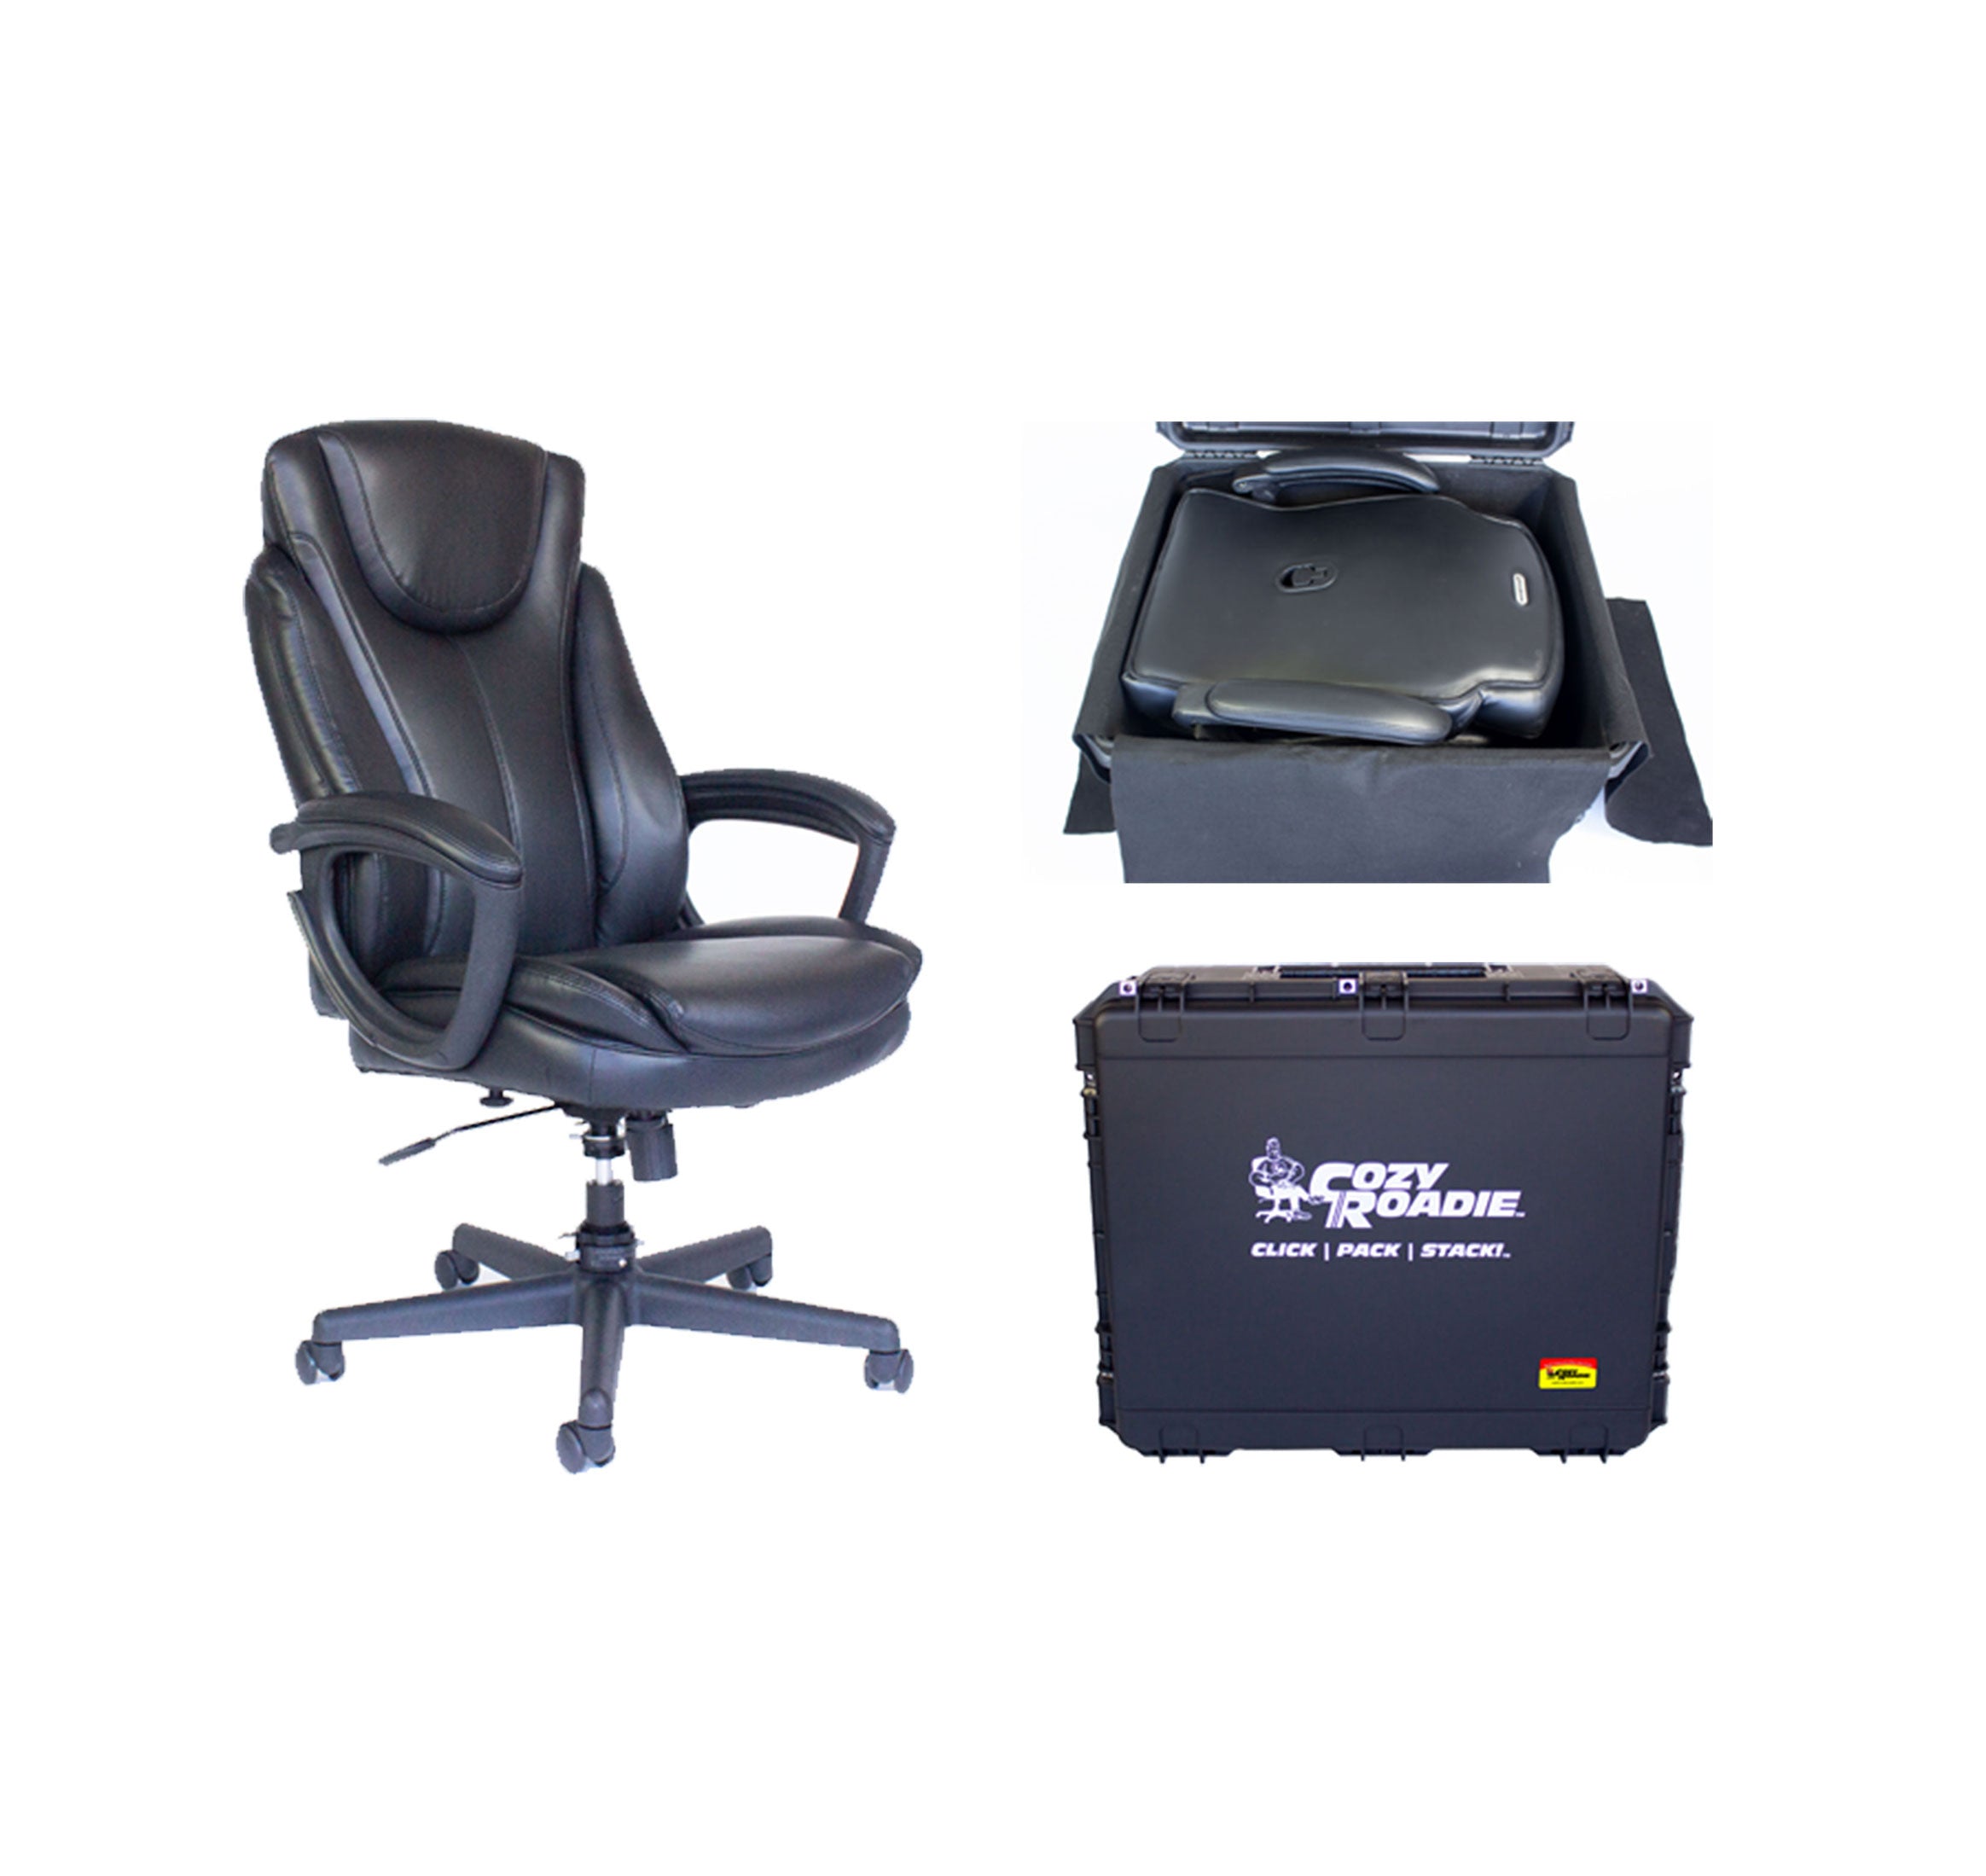 Cozy Roadie - Fully Portable Crew Chair bundle. shown with folded chair in case